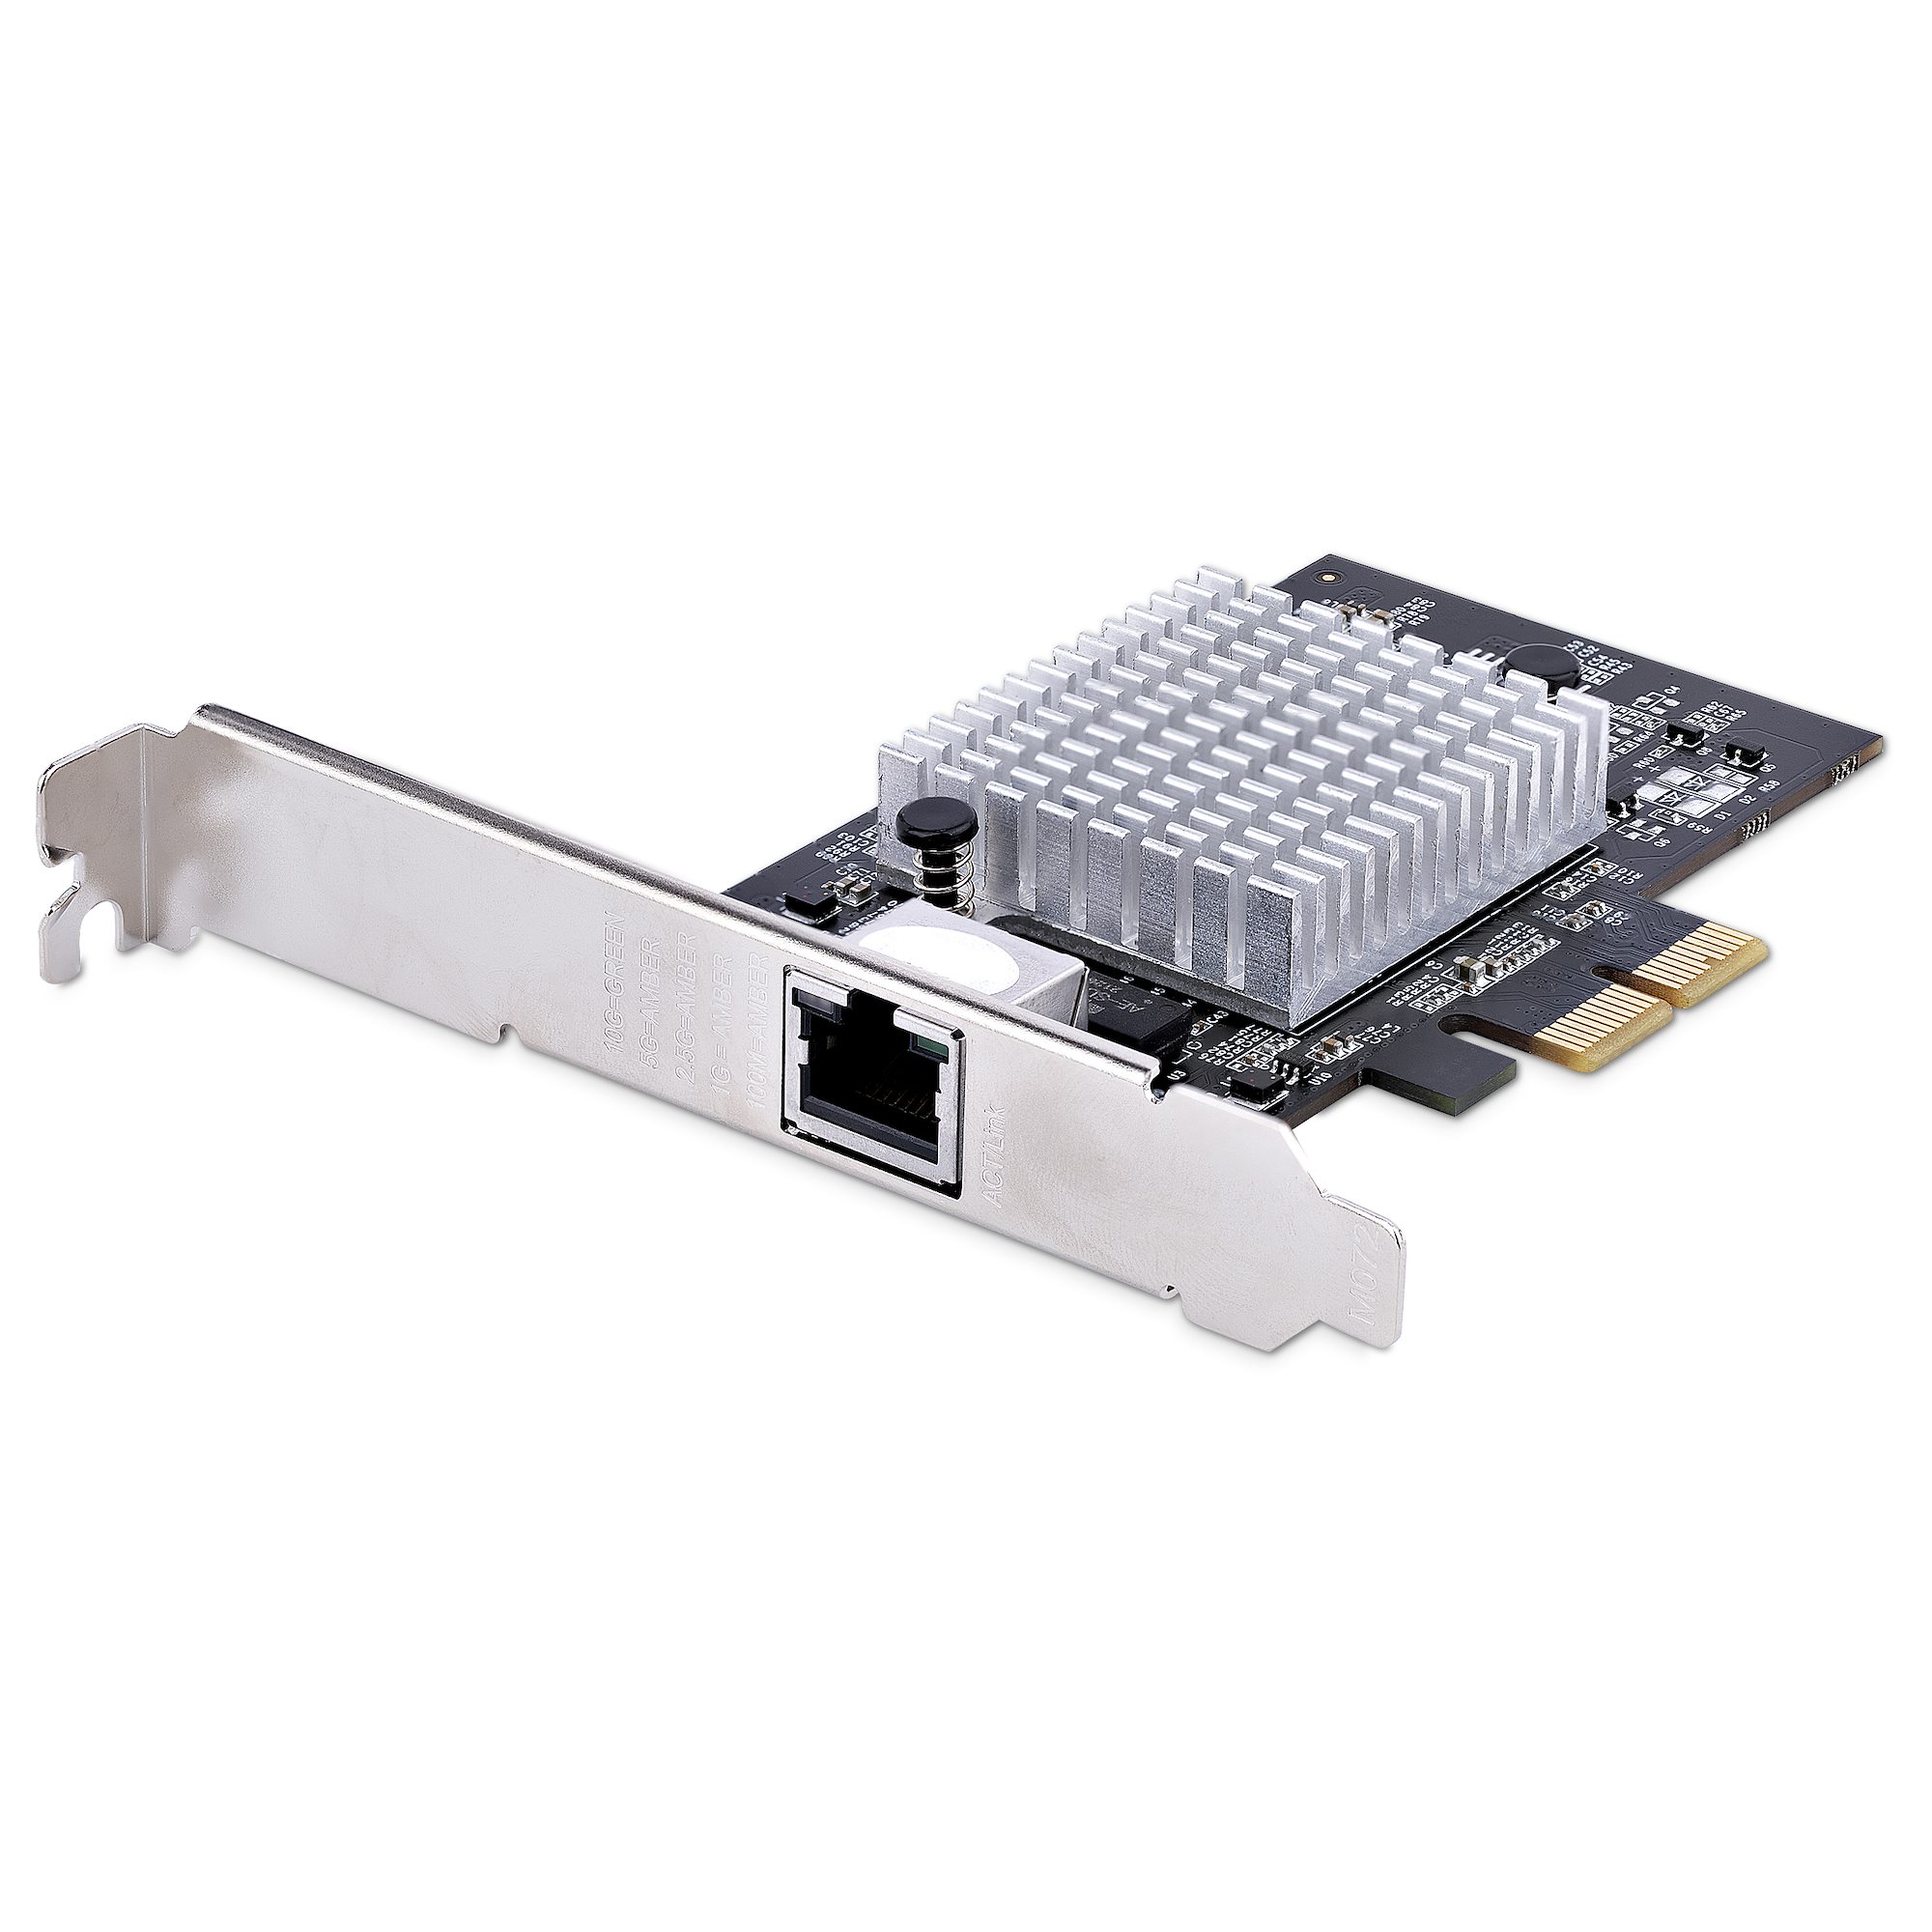 1-Port 10Gbps PCIe Network Adapter Card - ネットワークアダプタ